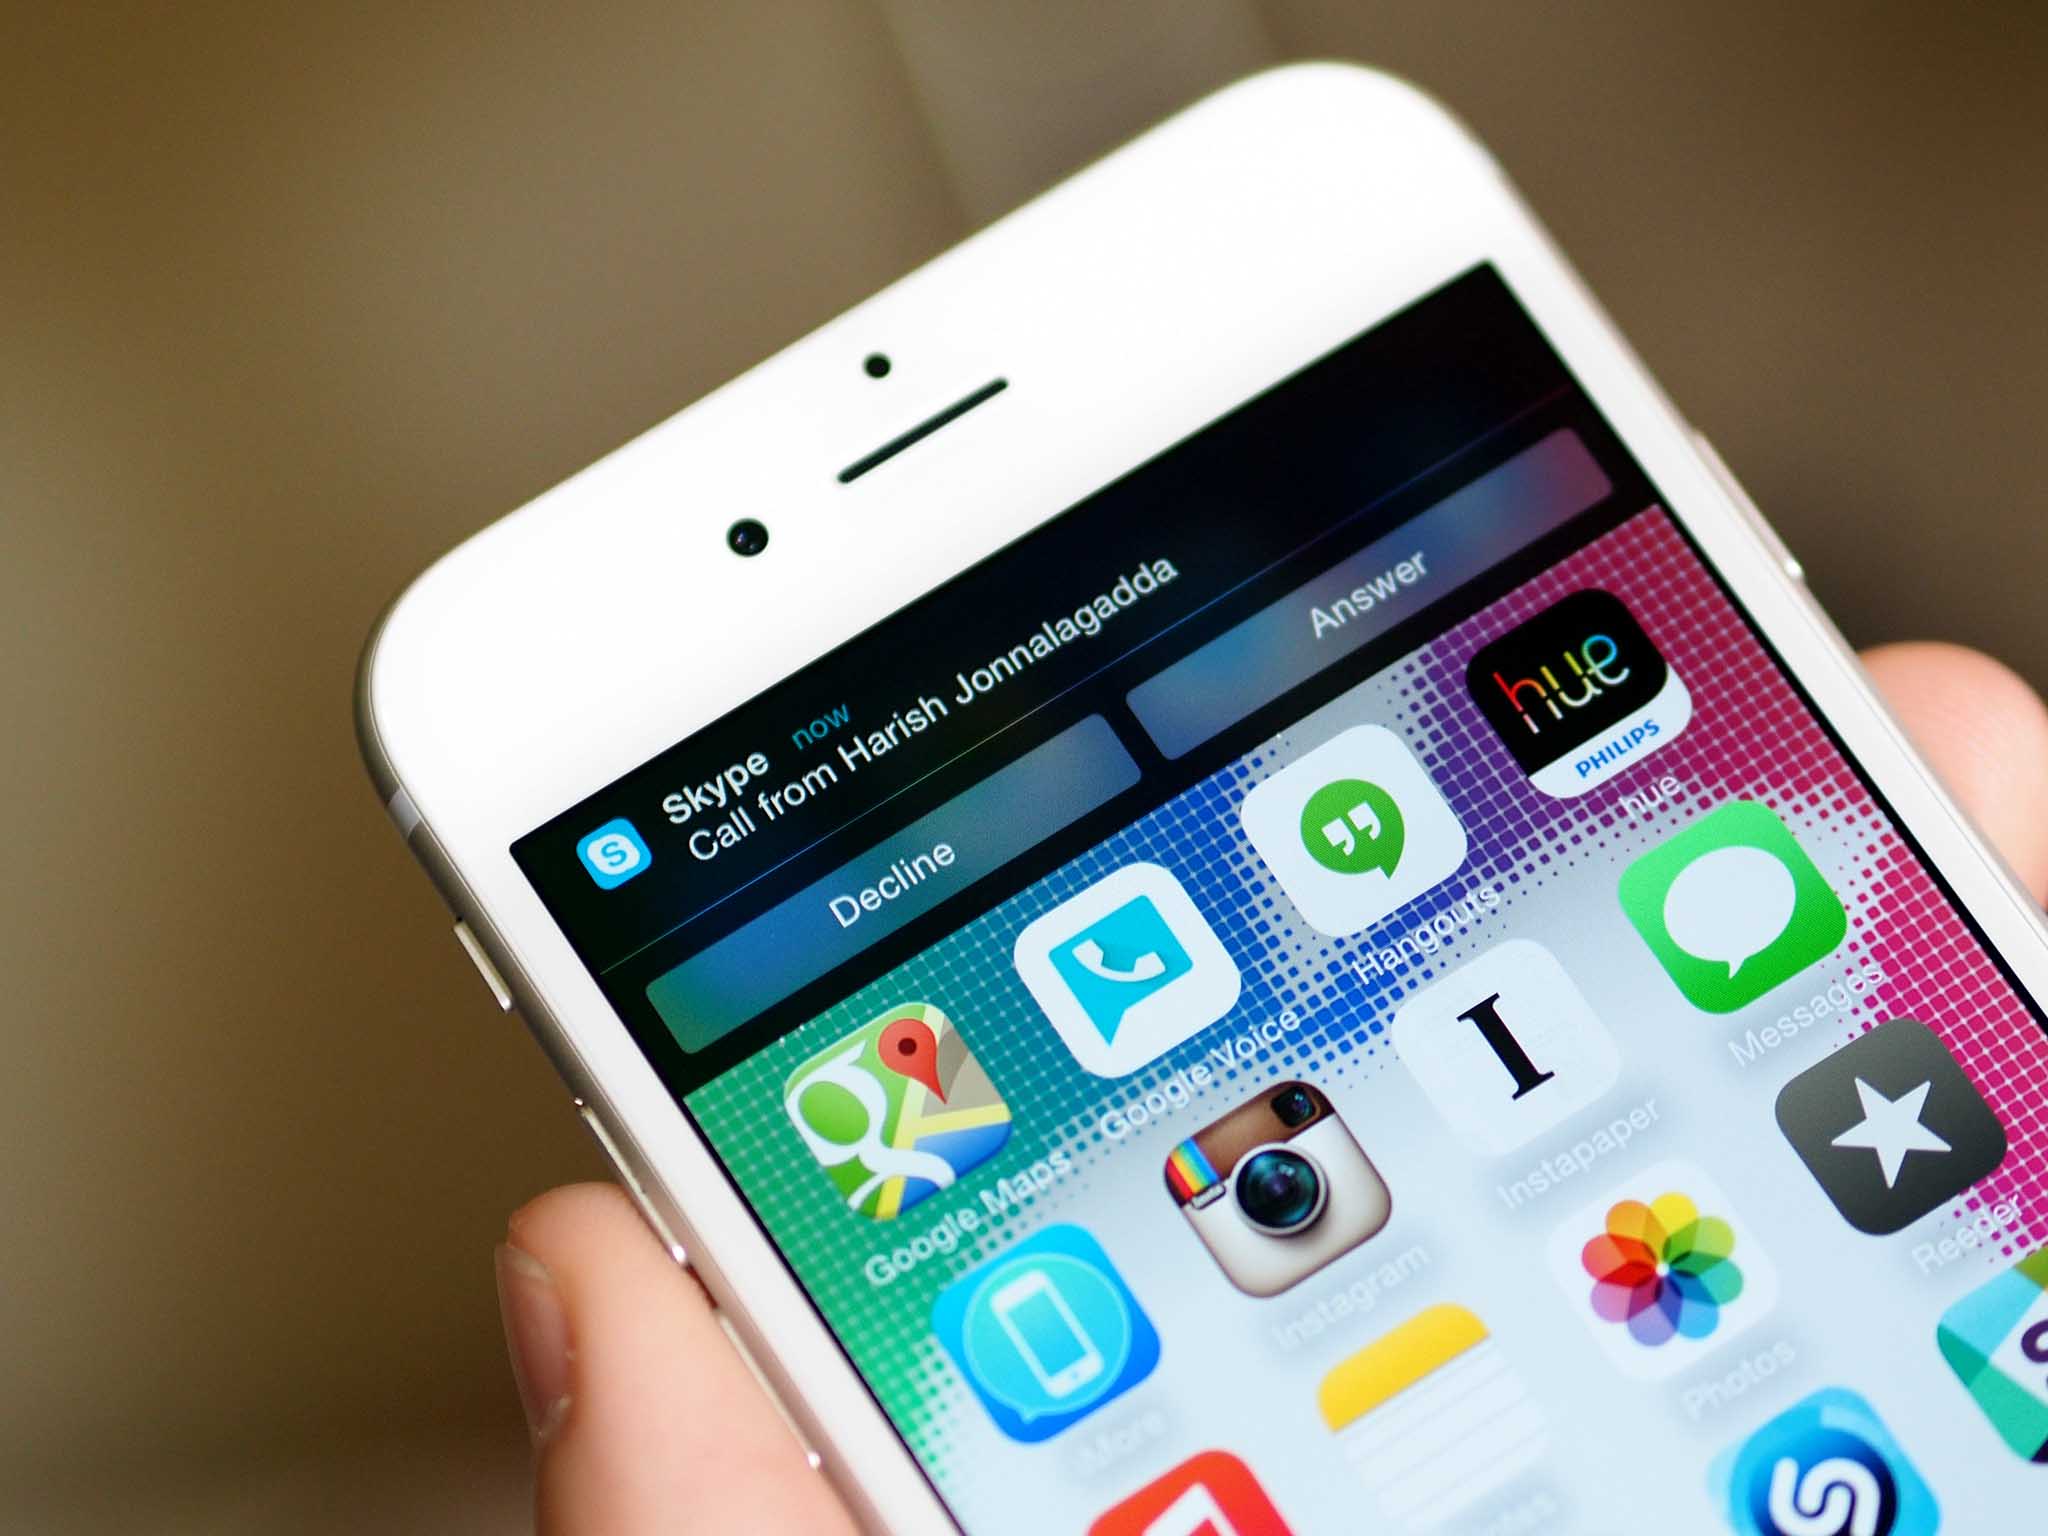 Skype for iPhone lets you choose how to answer right from the notification